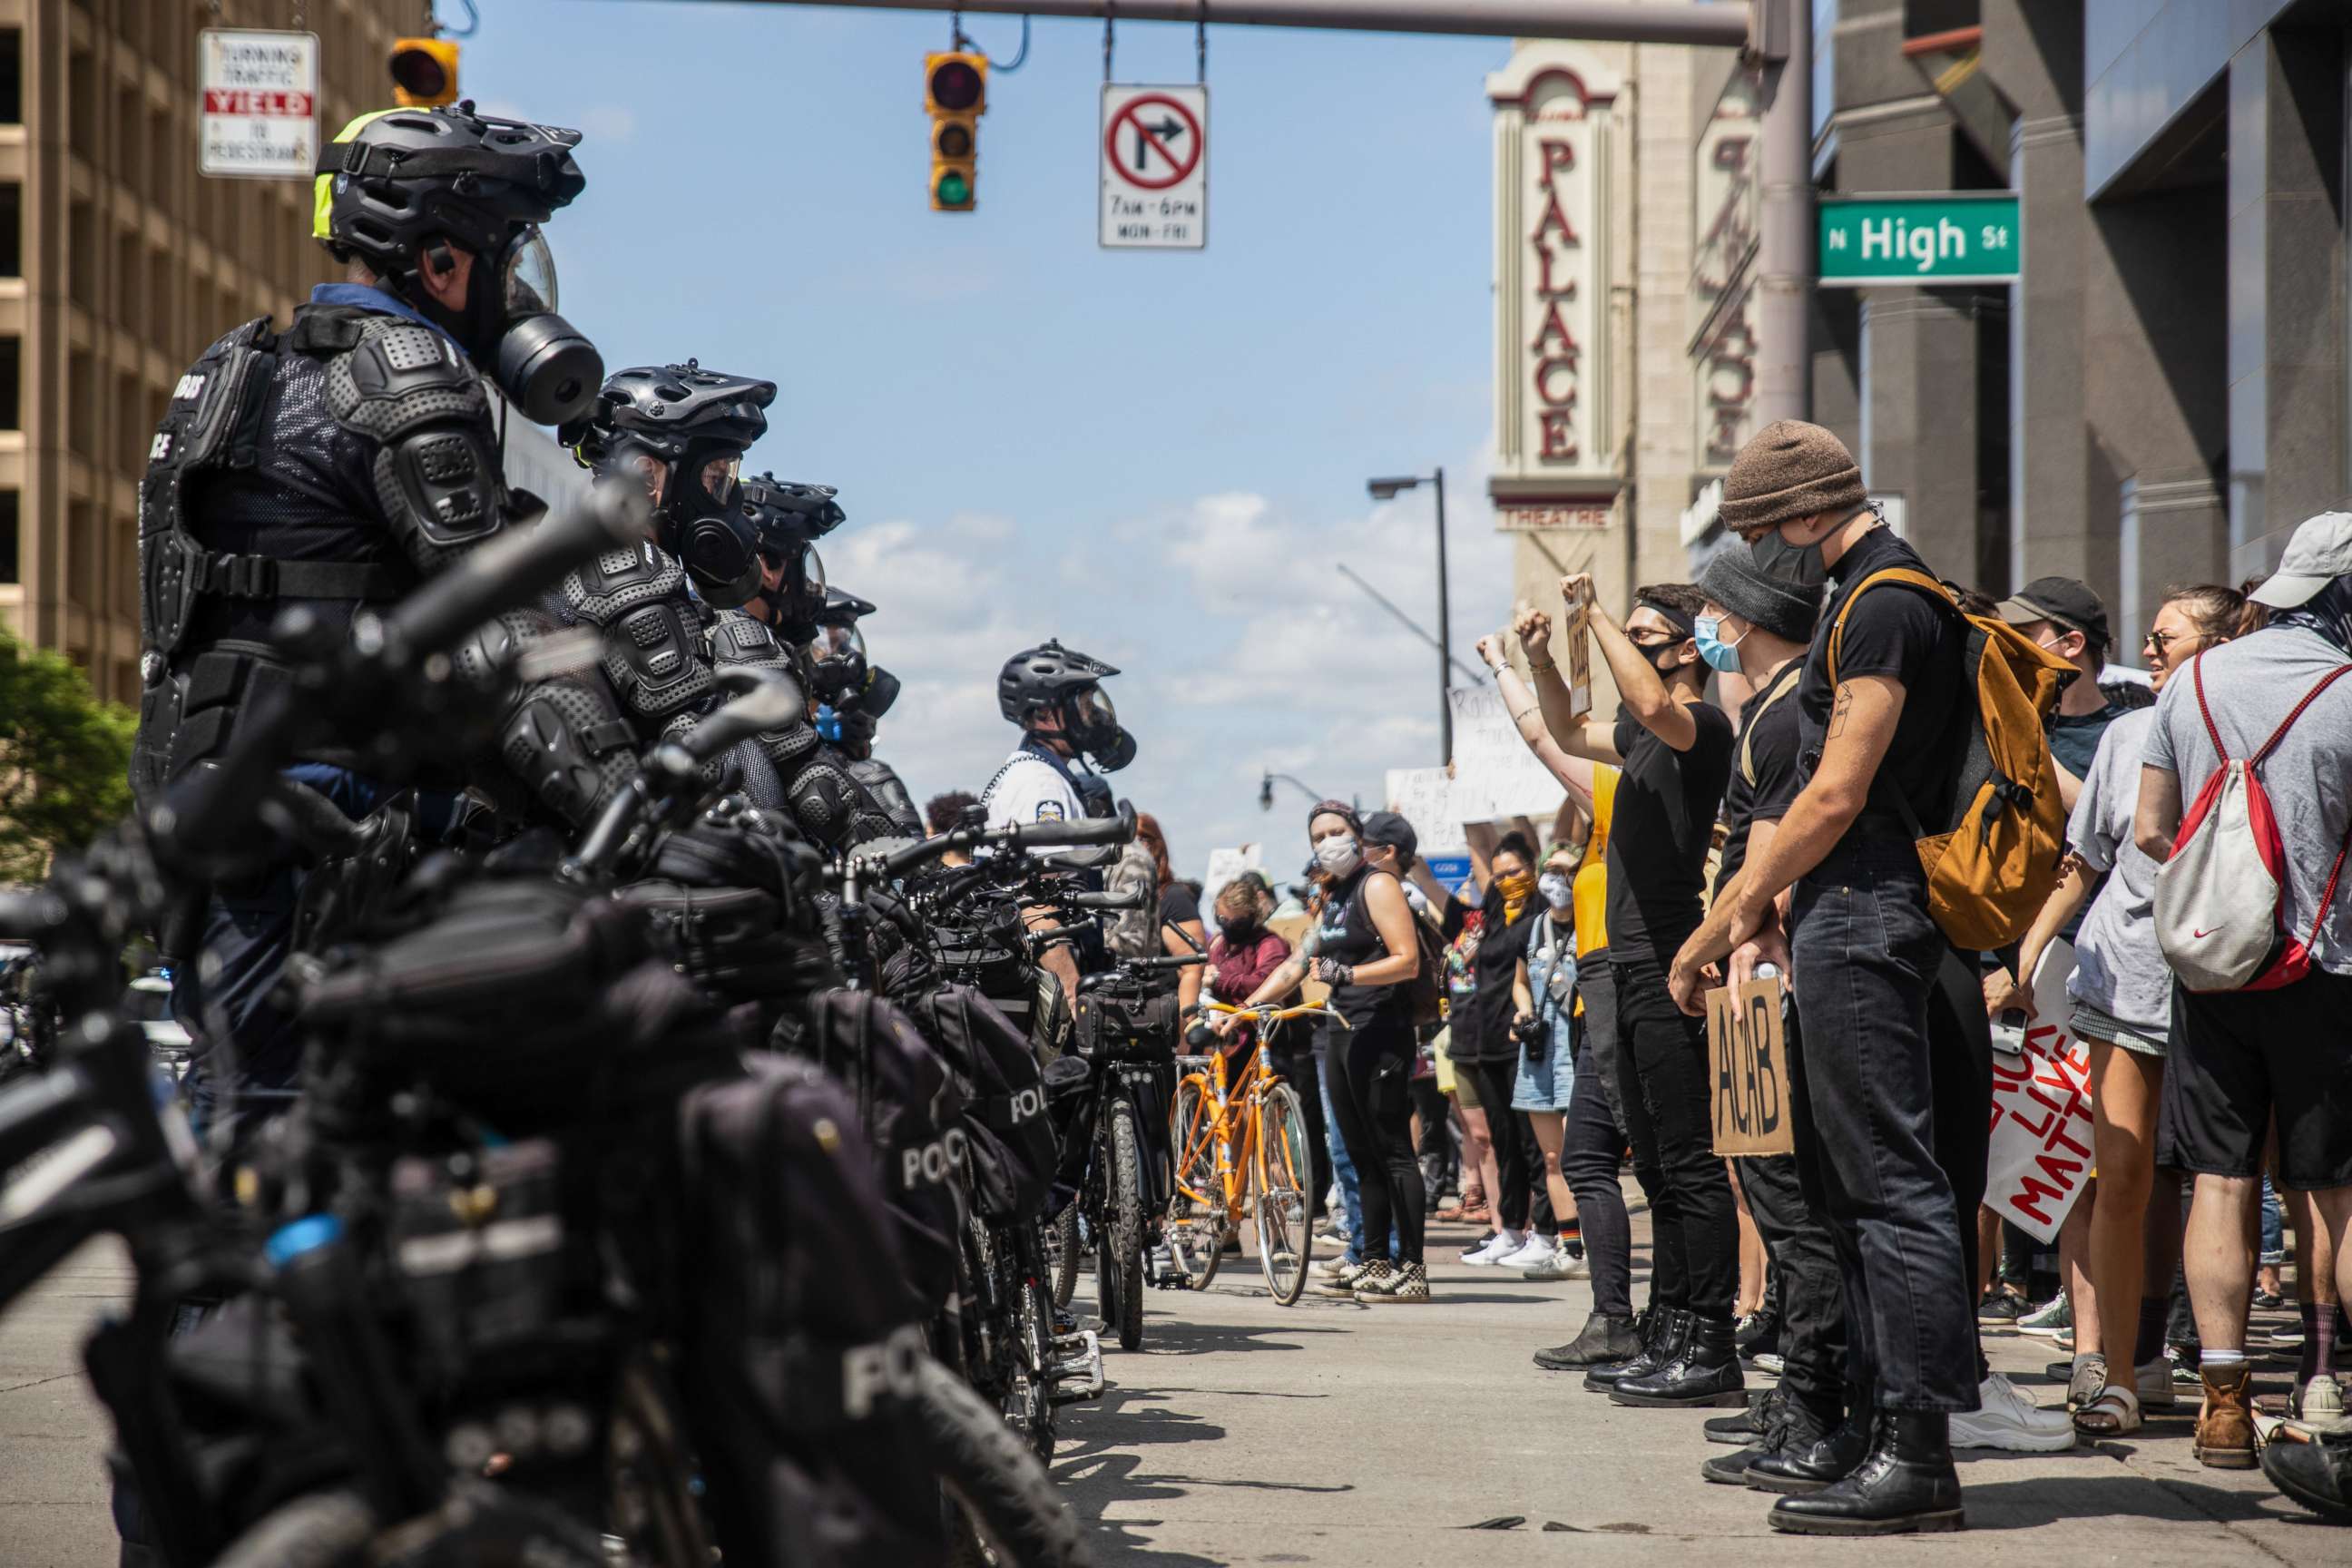 PHOTO: Protesters confront police officers standing in the middle of the street in Columbus, Ohio, during a demonstration against the murder of George Floyd under police custody, May 30, 2020.